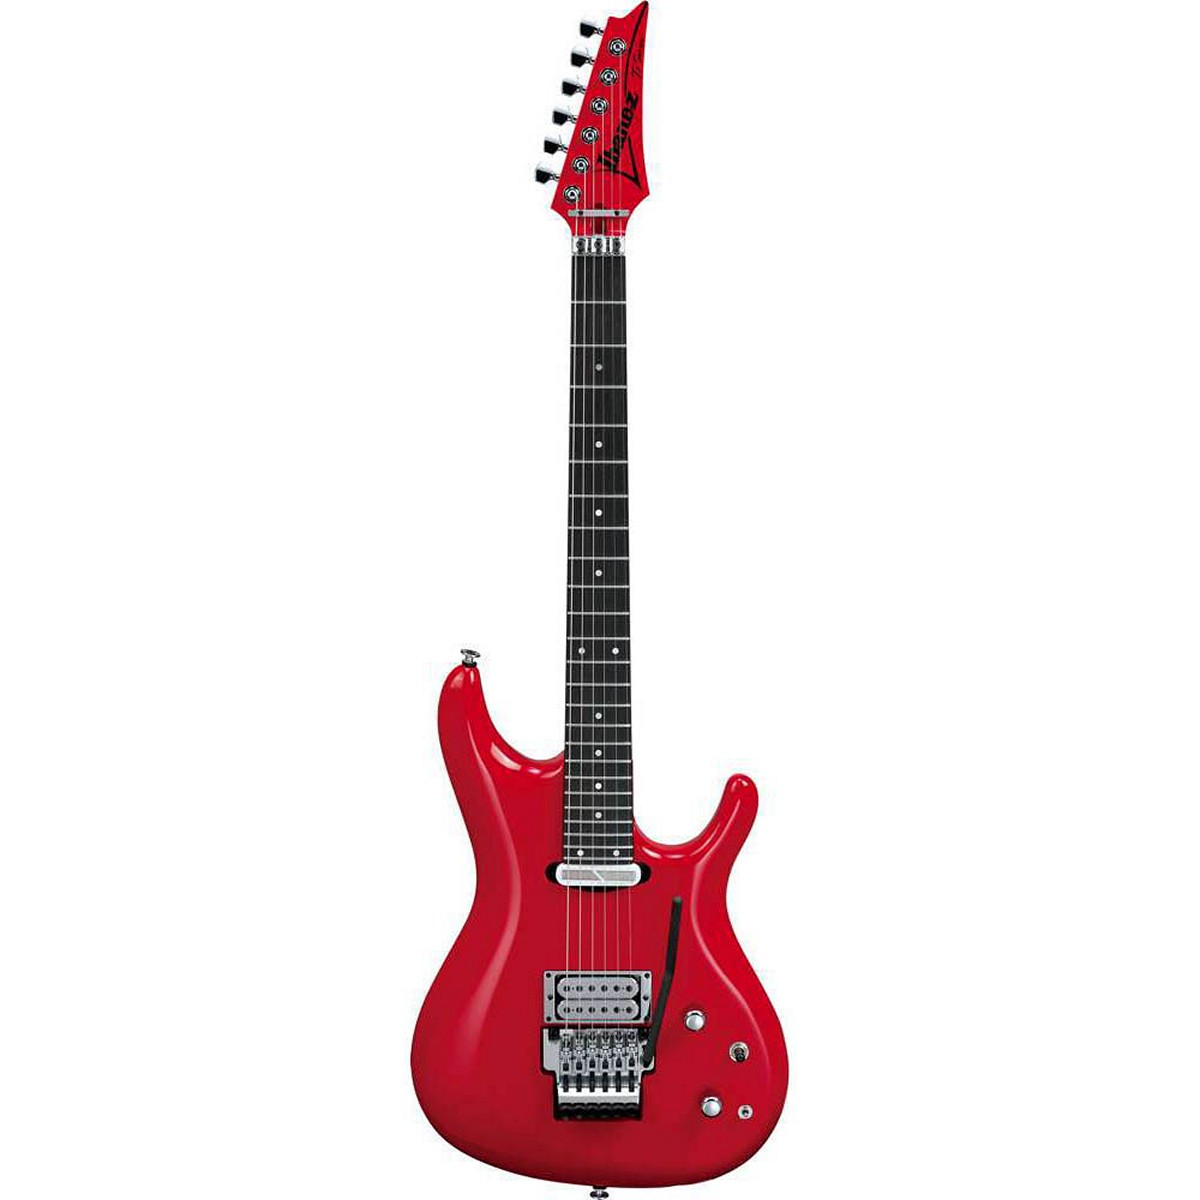 IBANEZ JS2480-MCR MUSCLE CAR RED